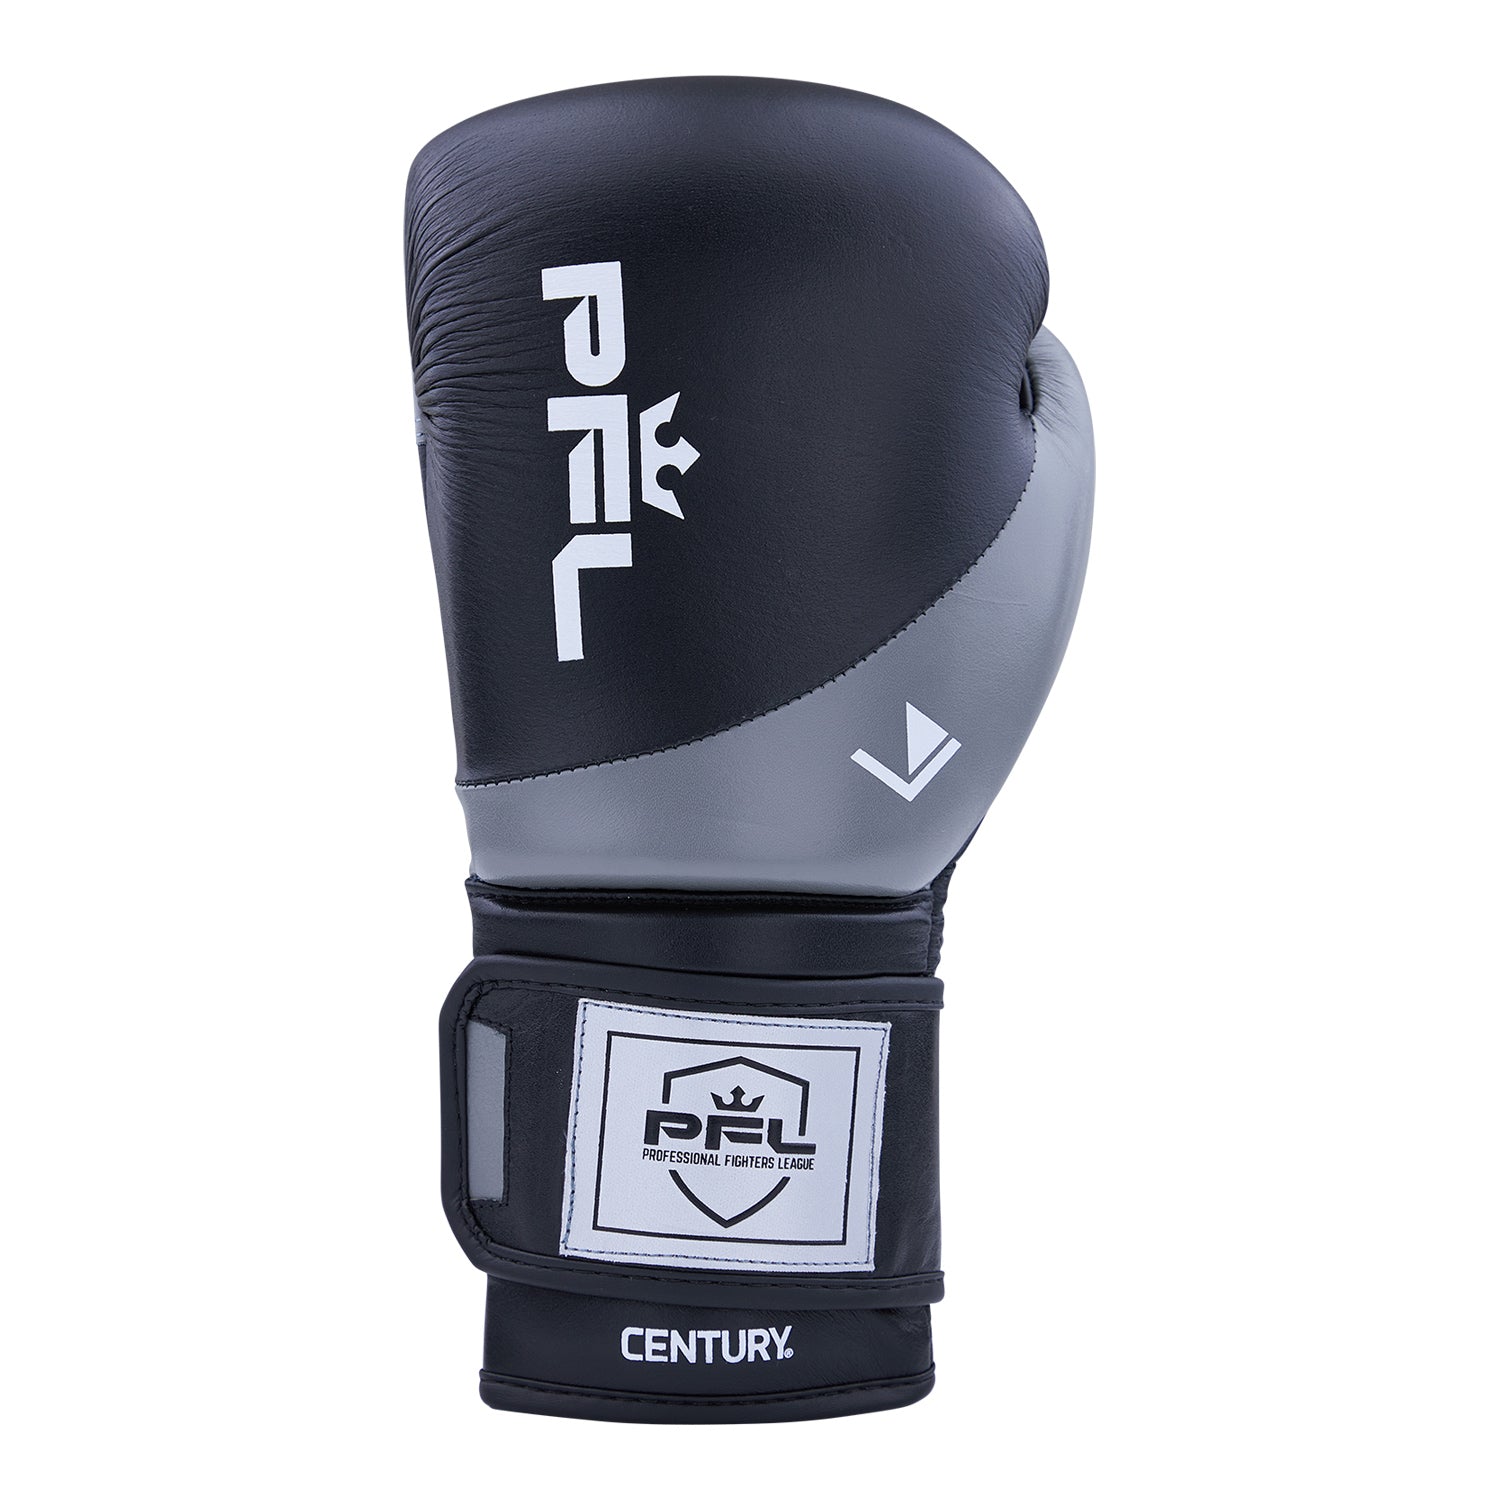 PFL Heavy Bag Gloves - Front View